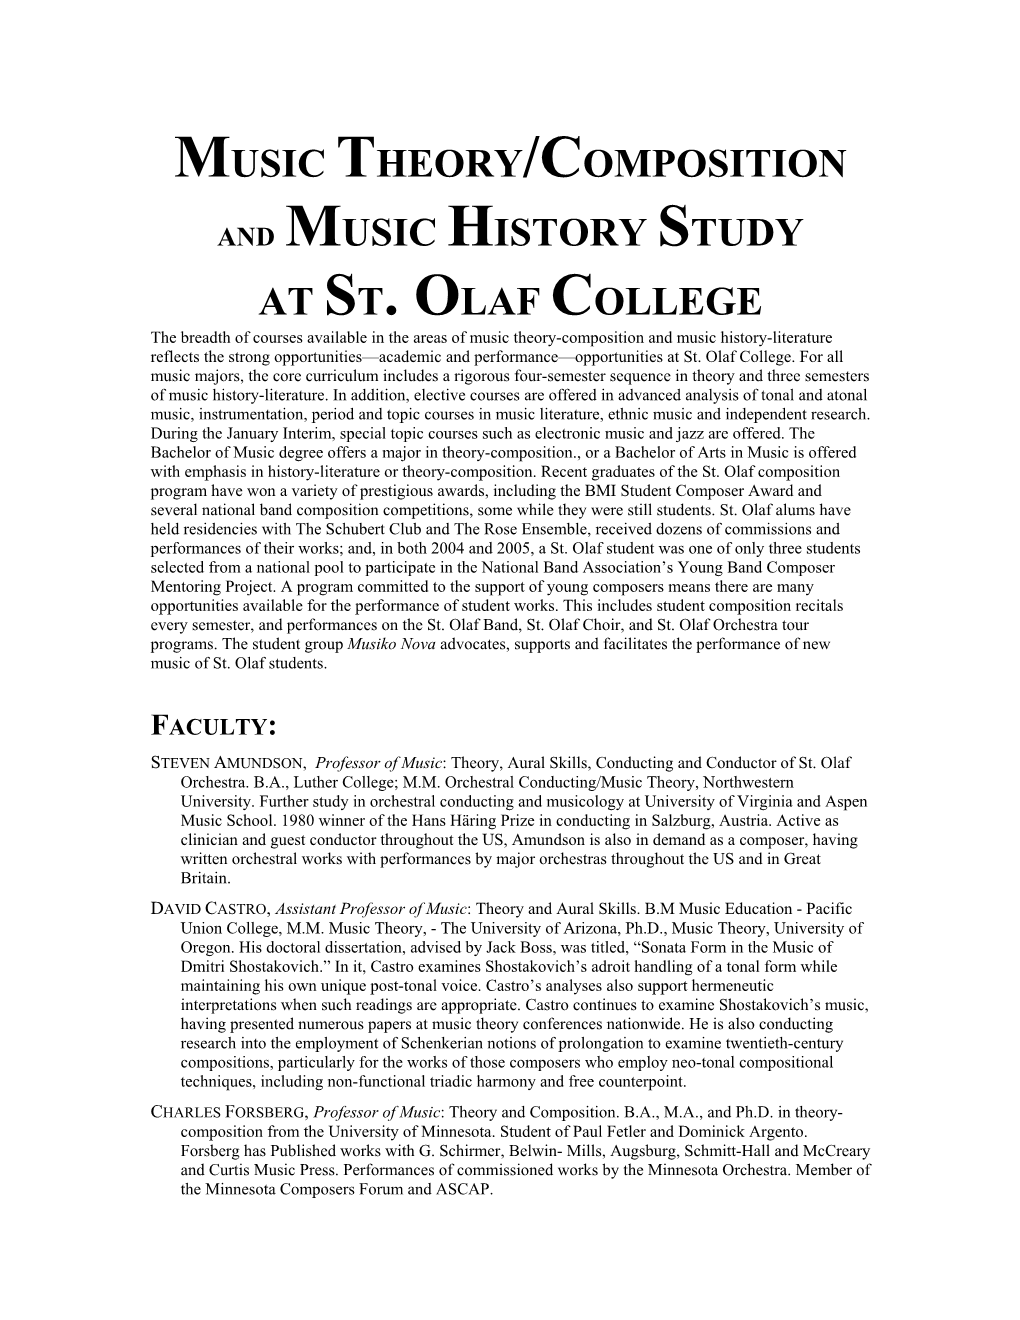 Music Theory/Composition and Music History Study at St